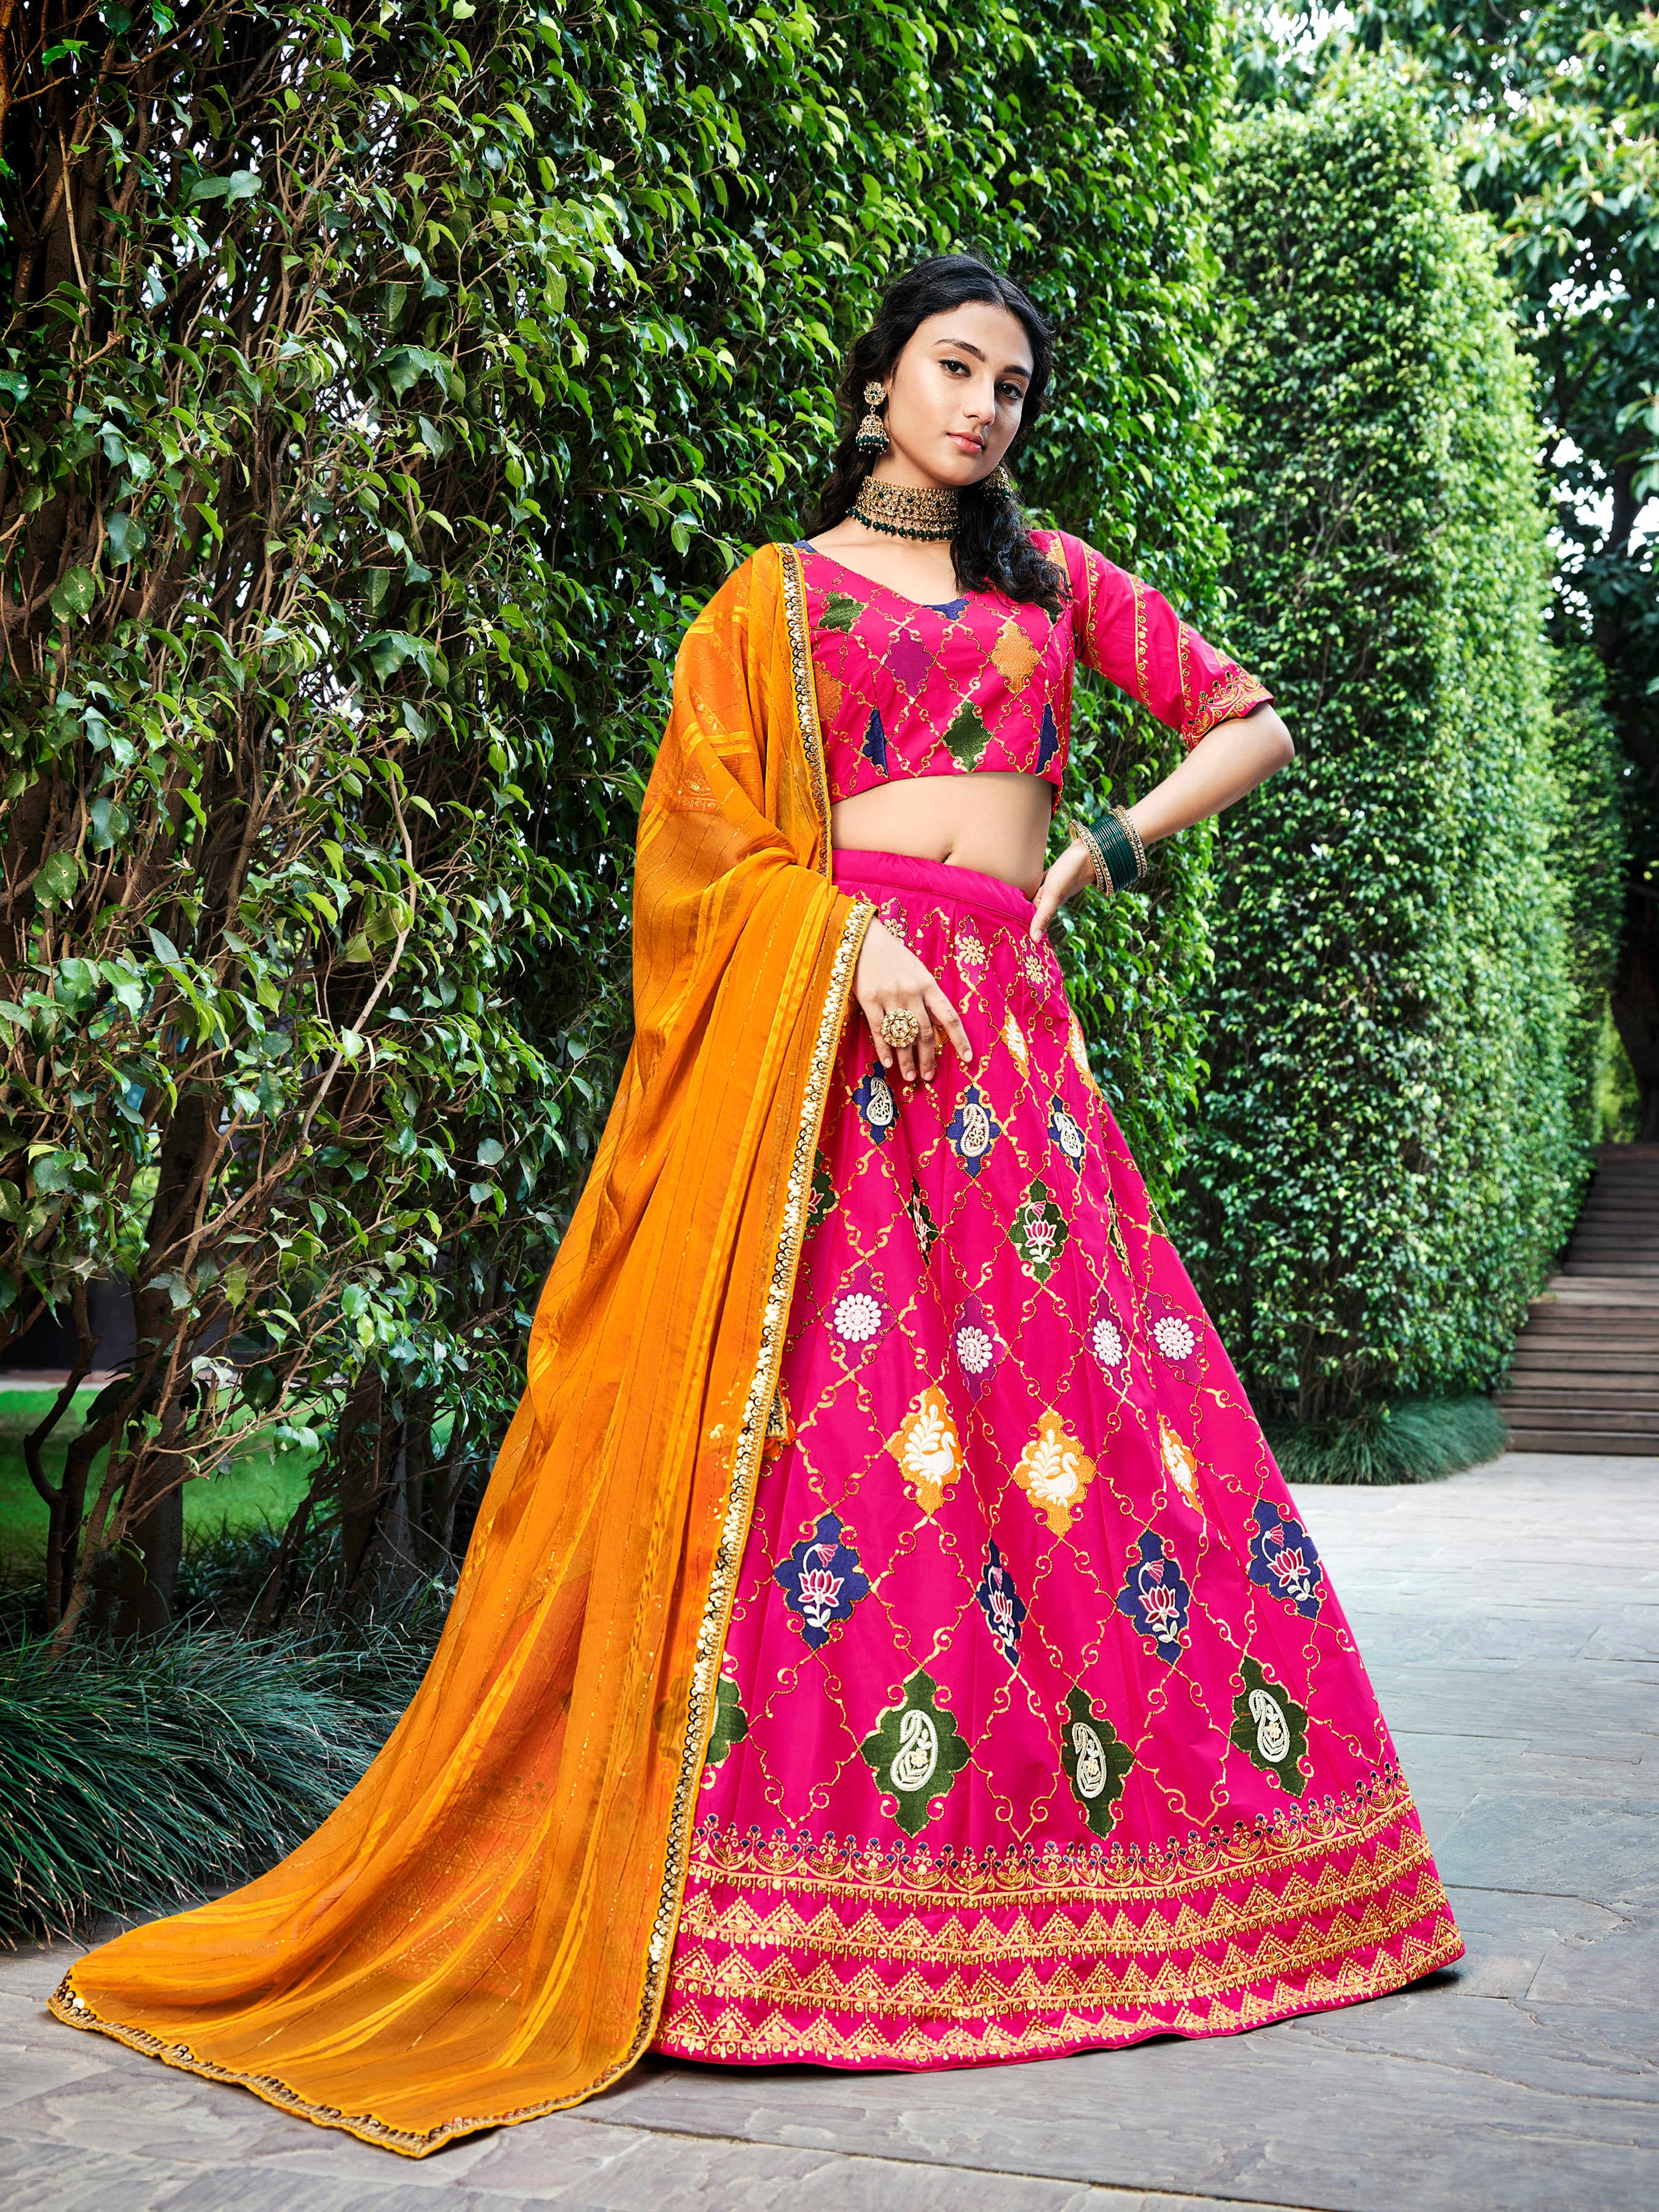 4 quintessential contemporary lehengas that only Rakul Preet Singh can boss  | IWMBuzz